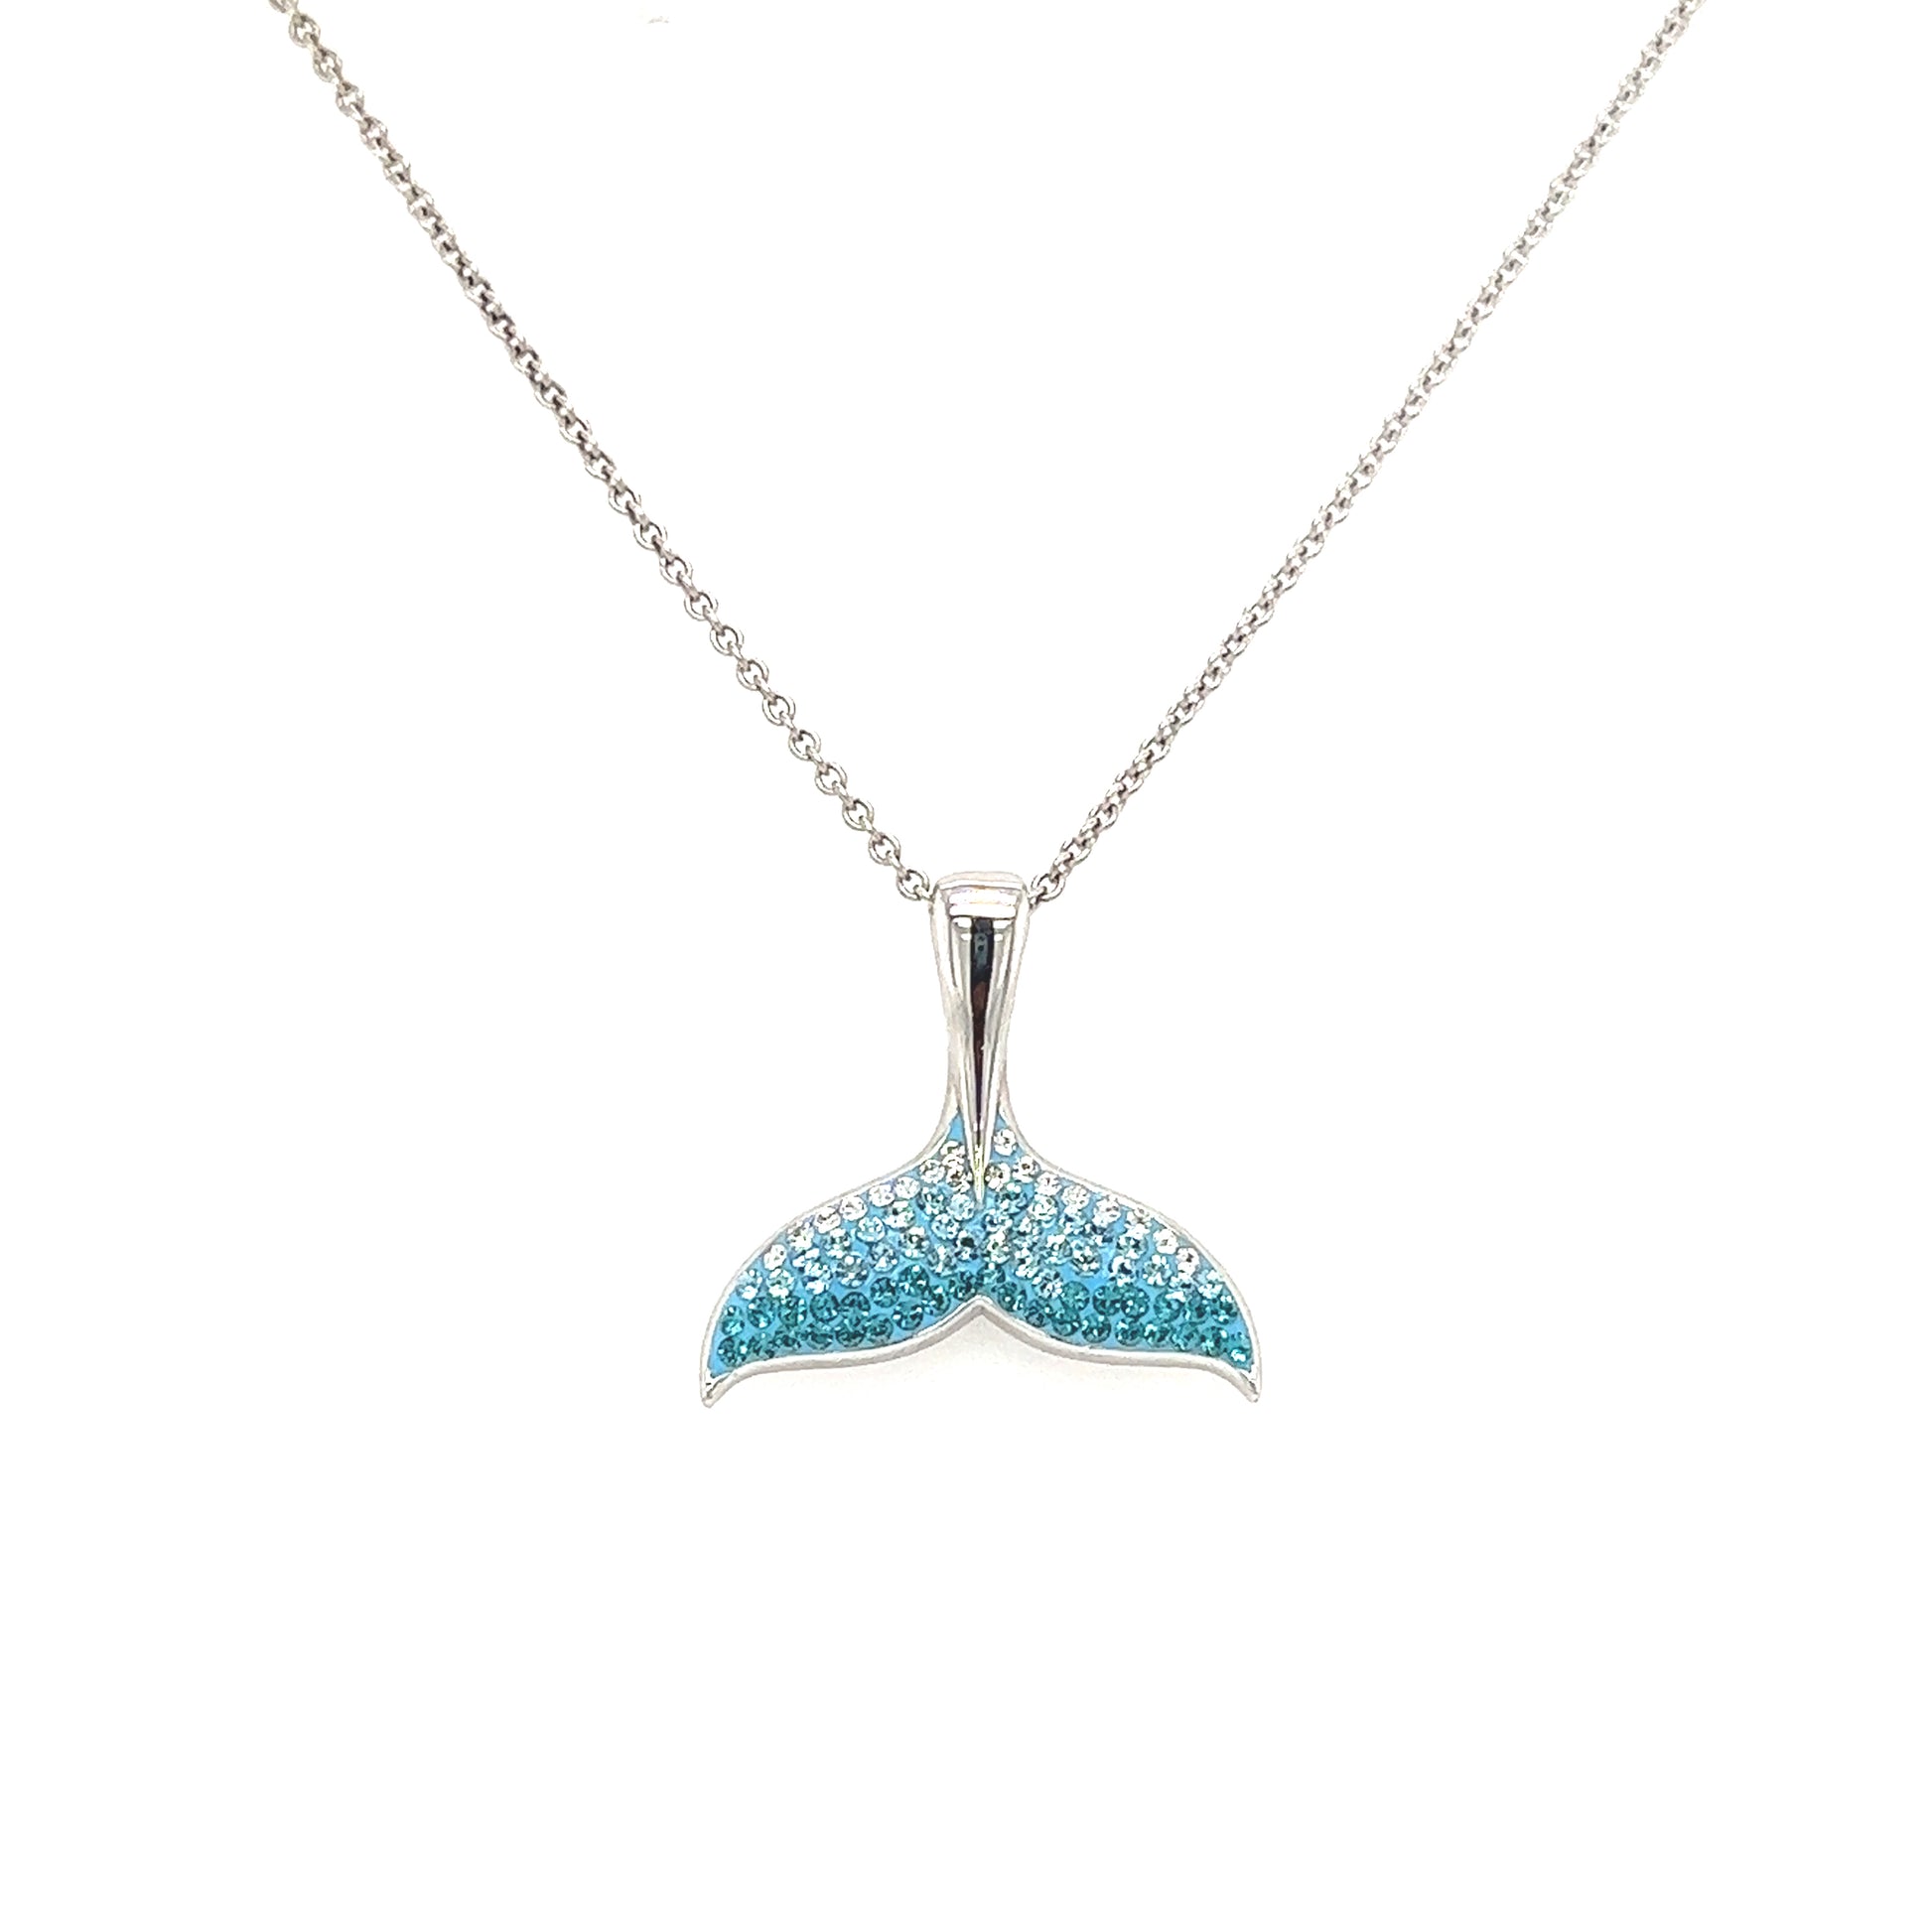 Whale Tail Necklace with Aqua Crystals in Sterling Silver Front View